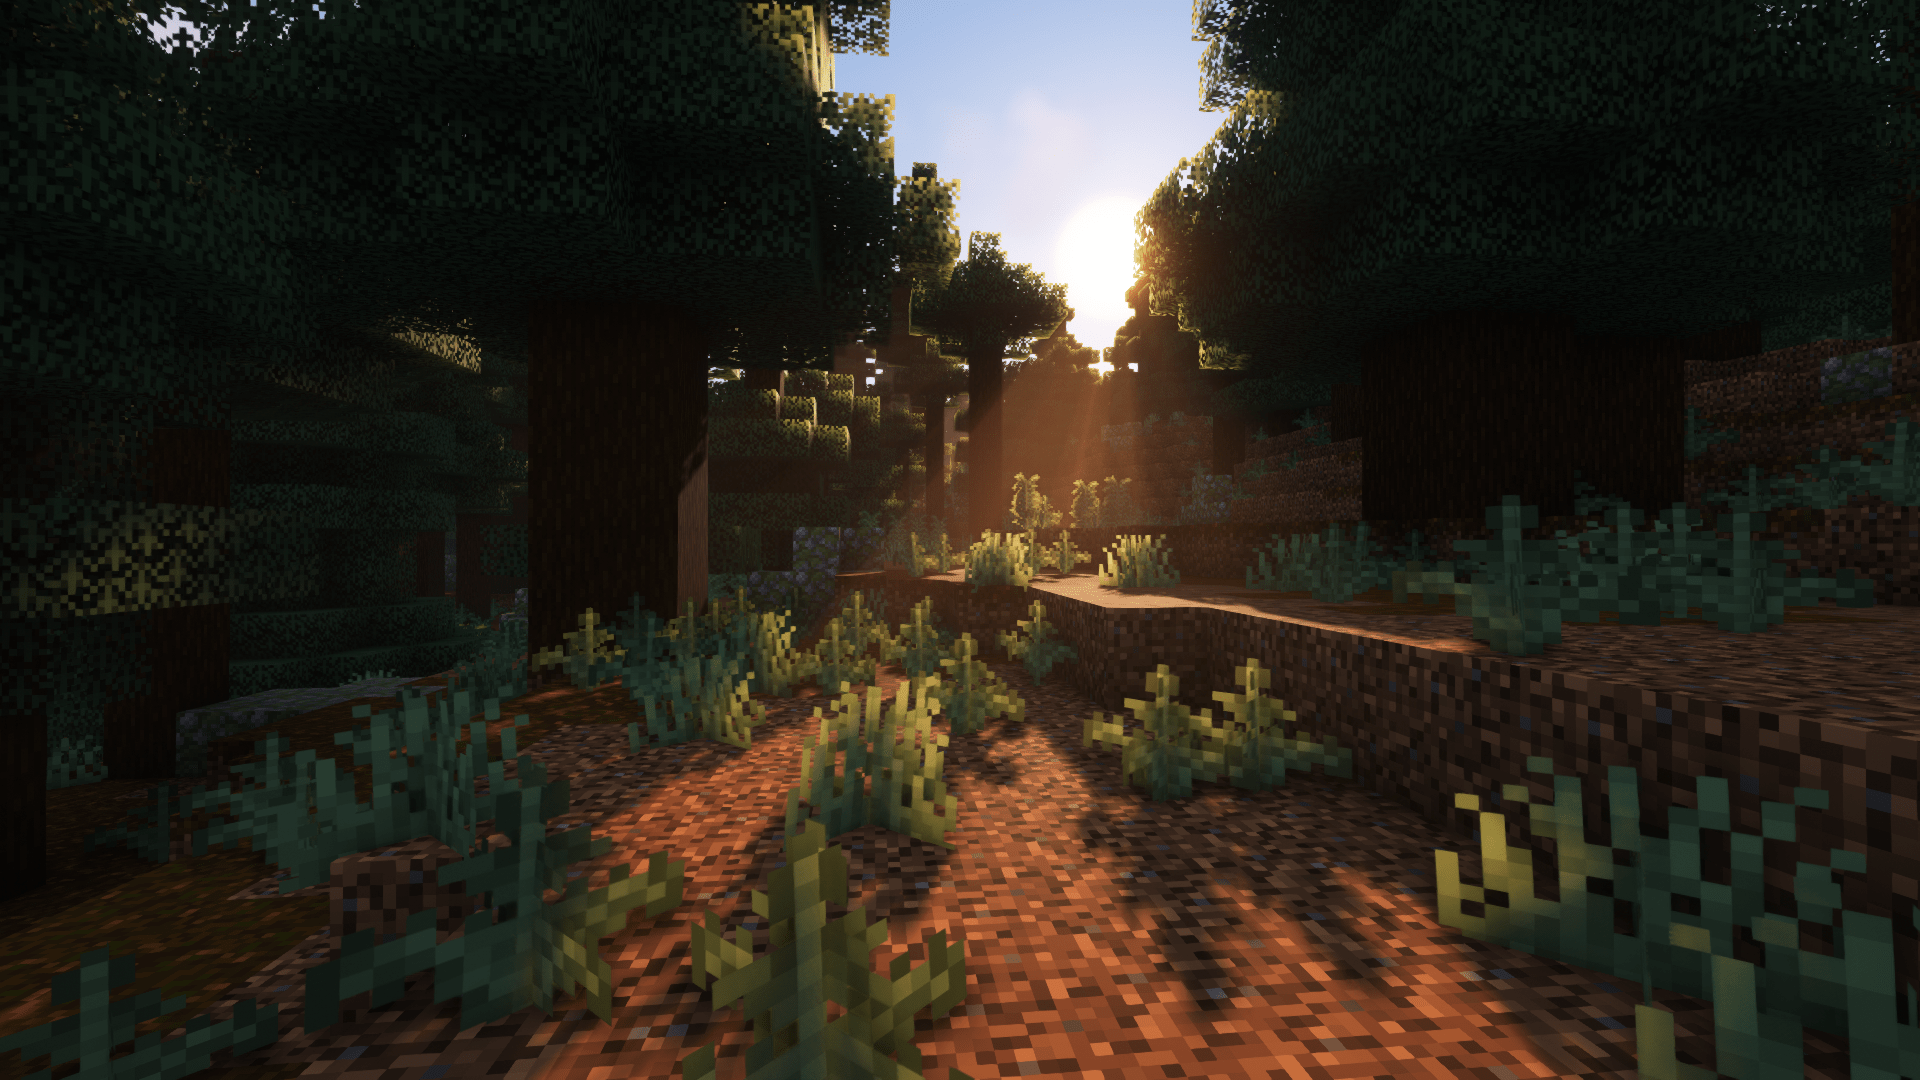 Wallpaper : Minecraft, shaders, Aestheticc Meme, video games, forest, trees 1920x1080